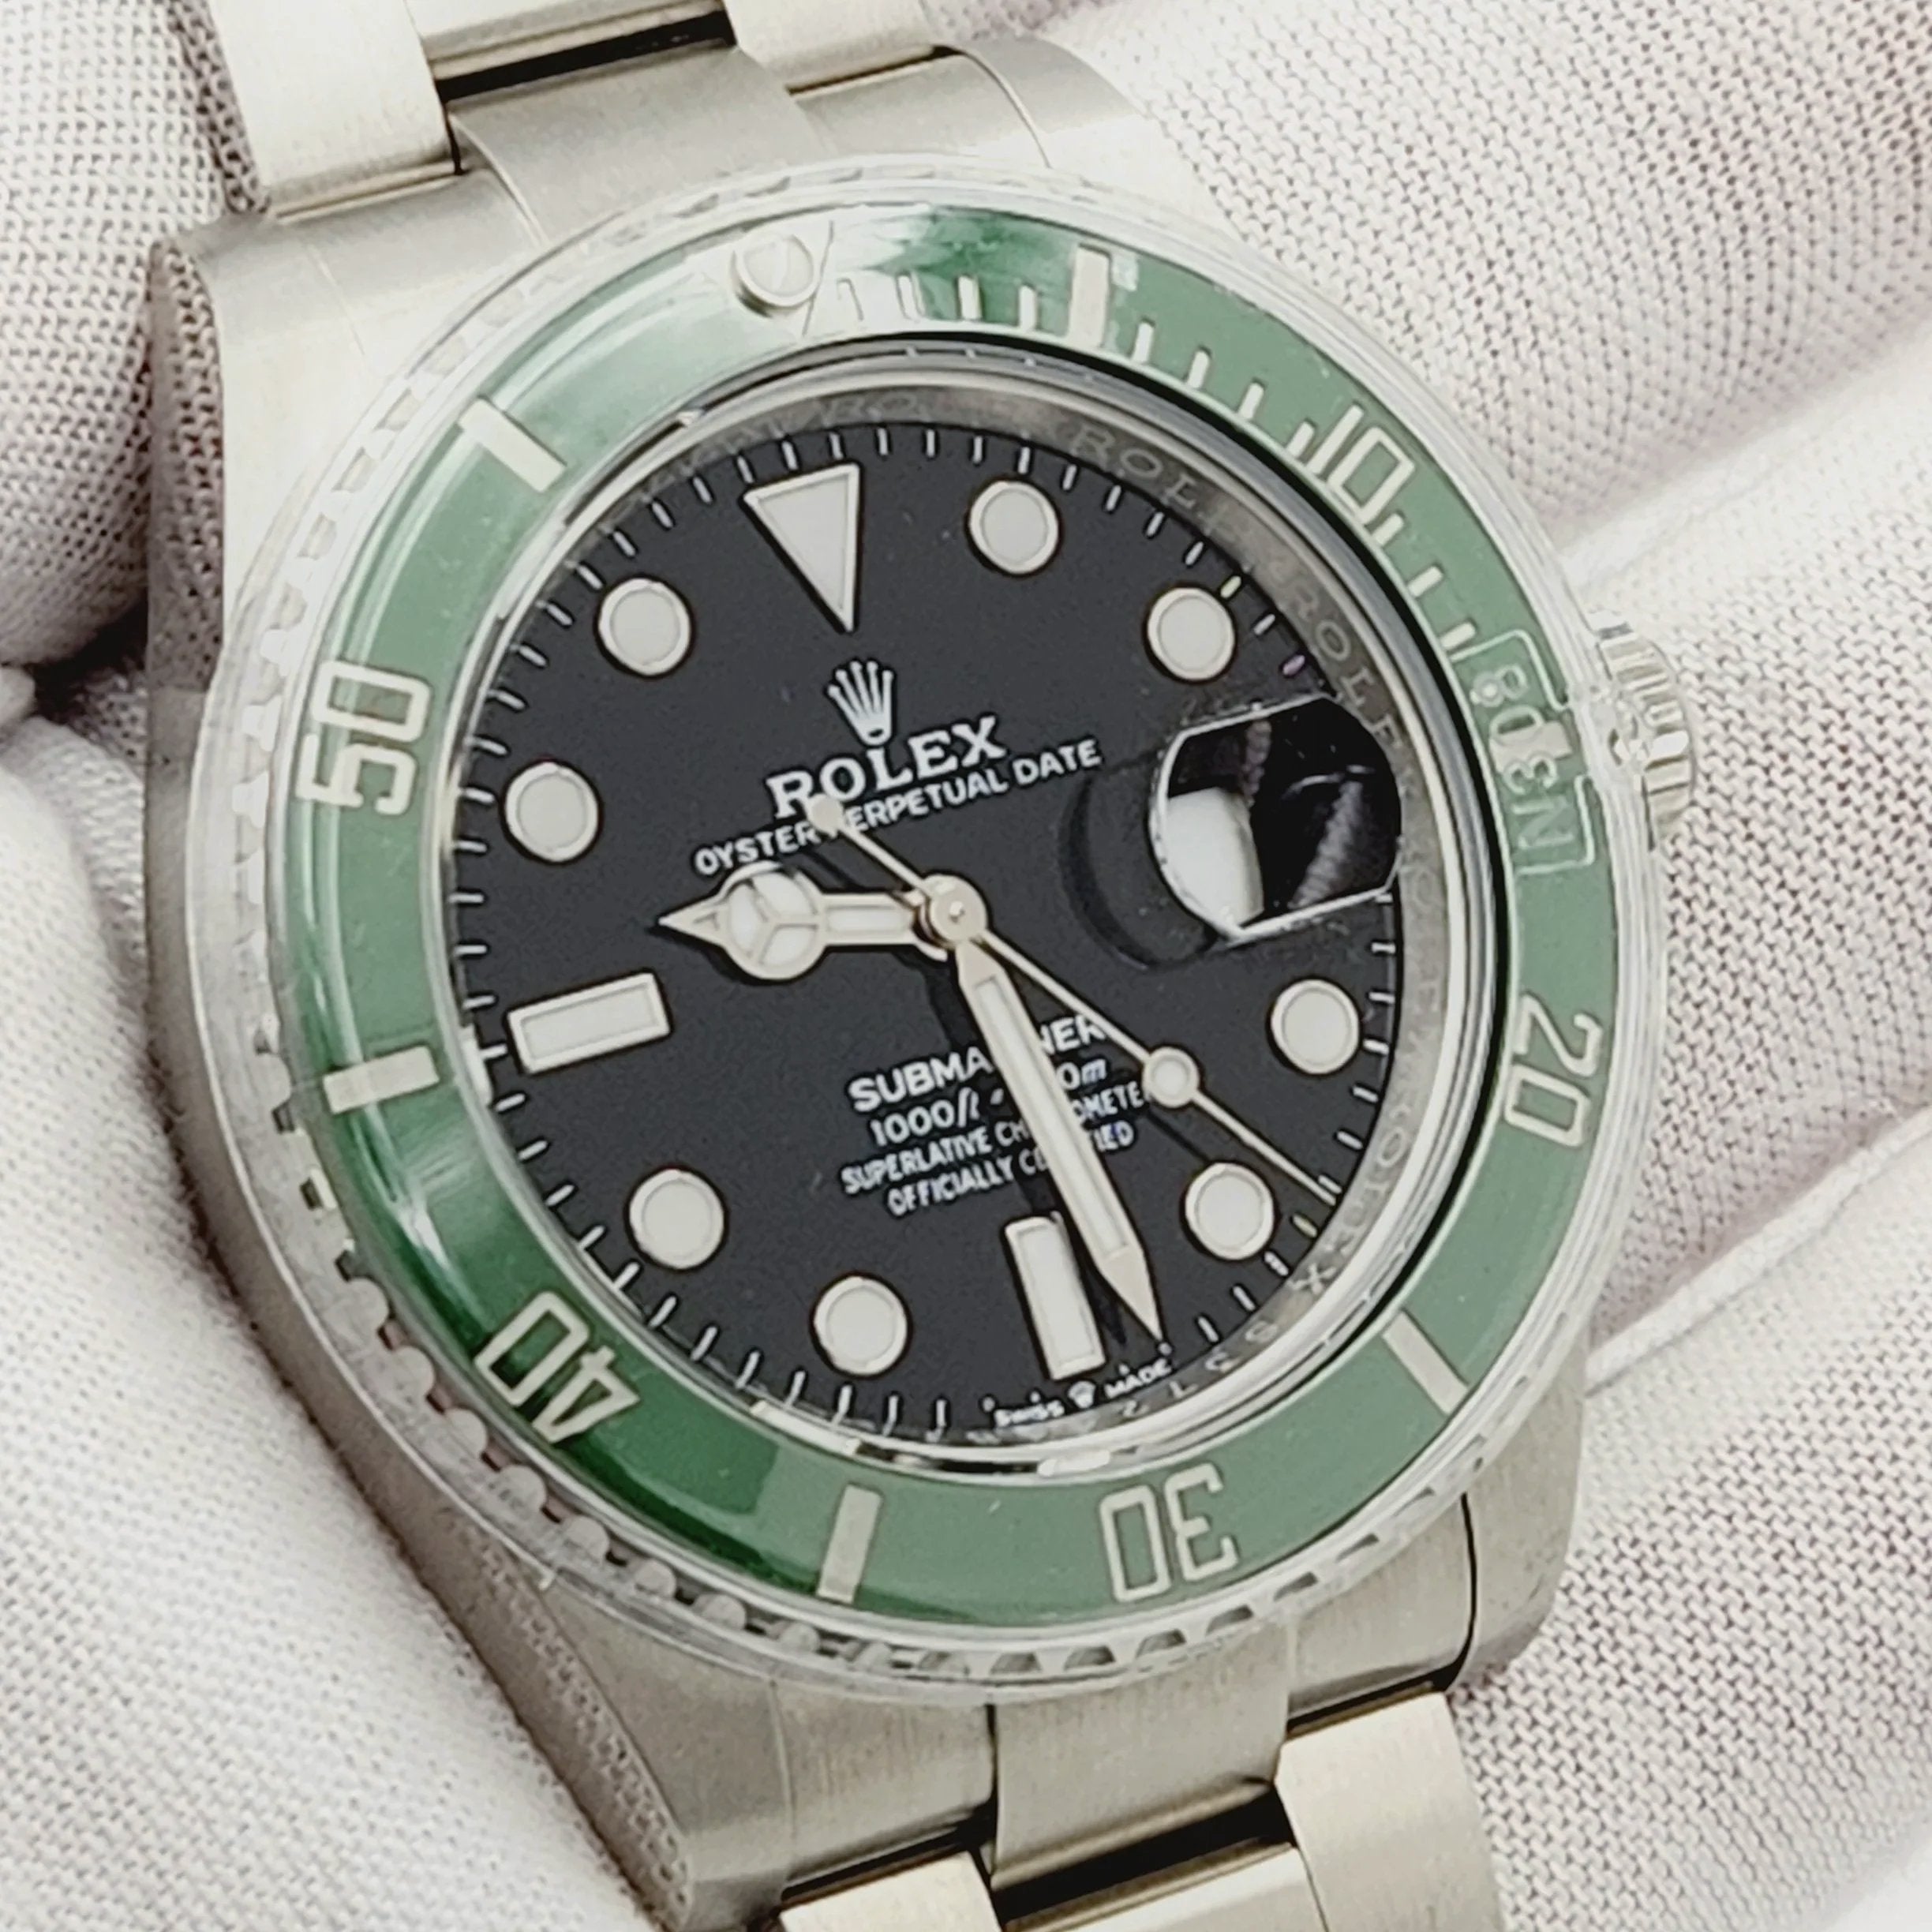 *2024 Men's Rolex 41mm Submariner Date "Starbucks" Oyster Perpetual Stainless Steel Watch with Black Dial and Green Ceramic Bezel. (NEW 126610LV)